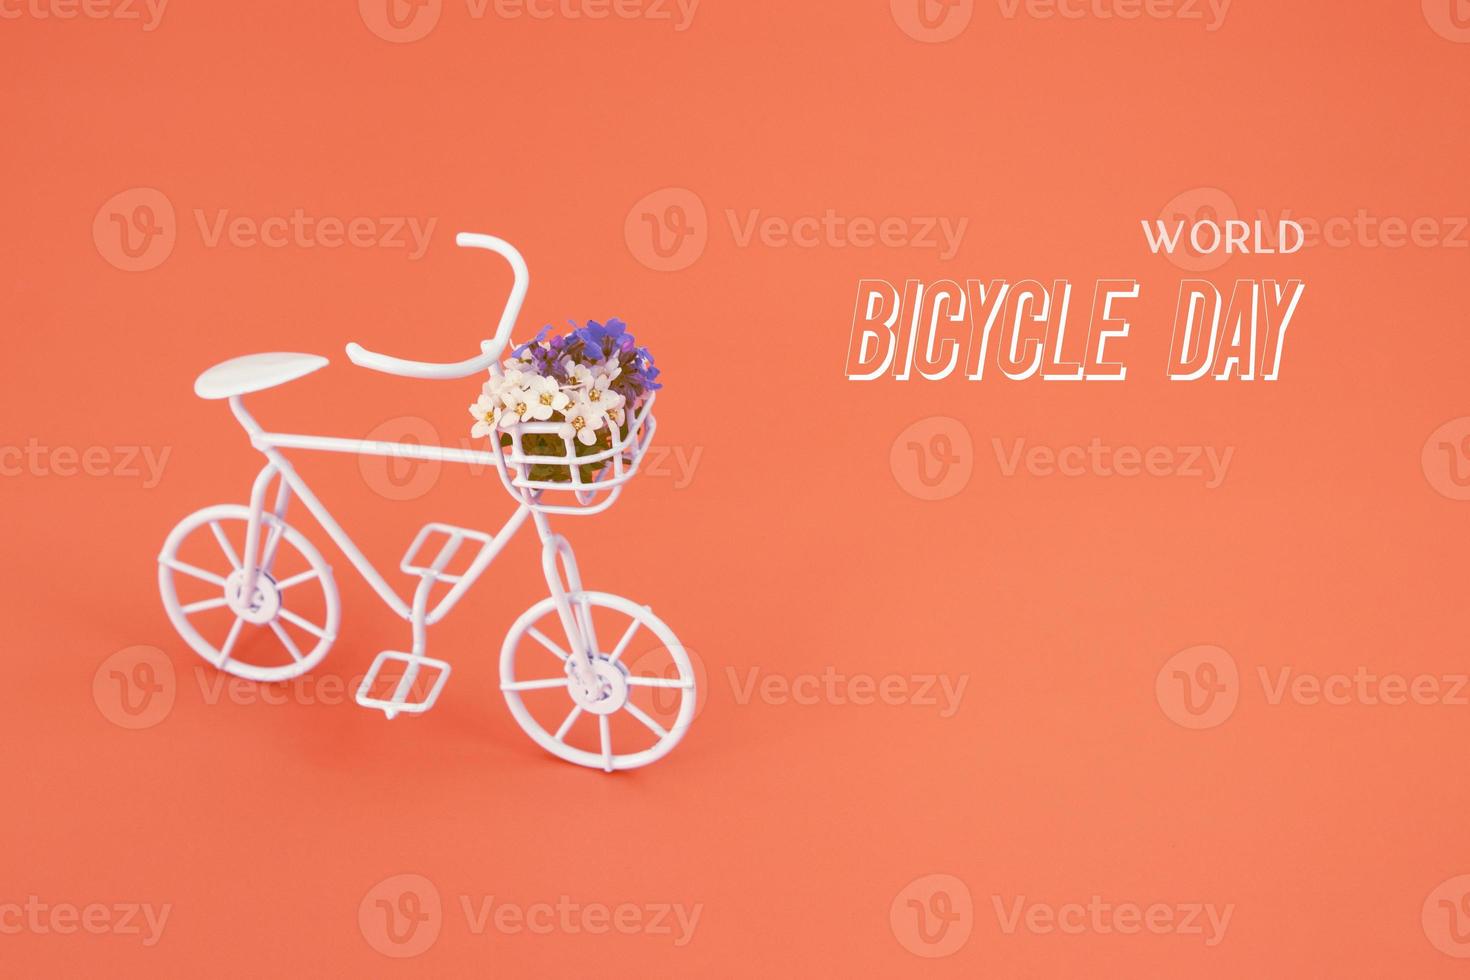 Decorative bicycle with flowers and text World Bicycle day on orange background photo